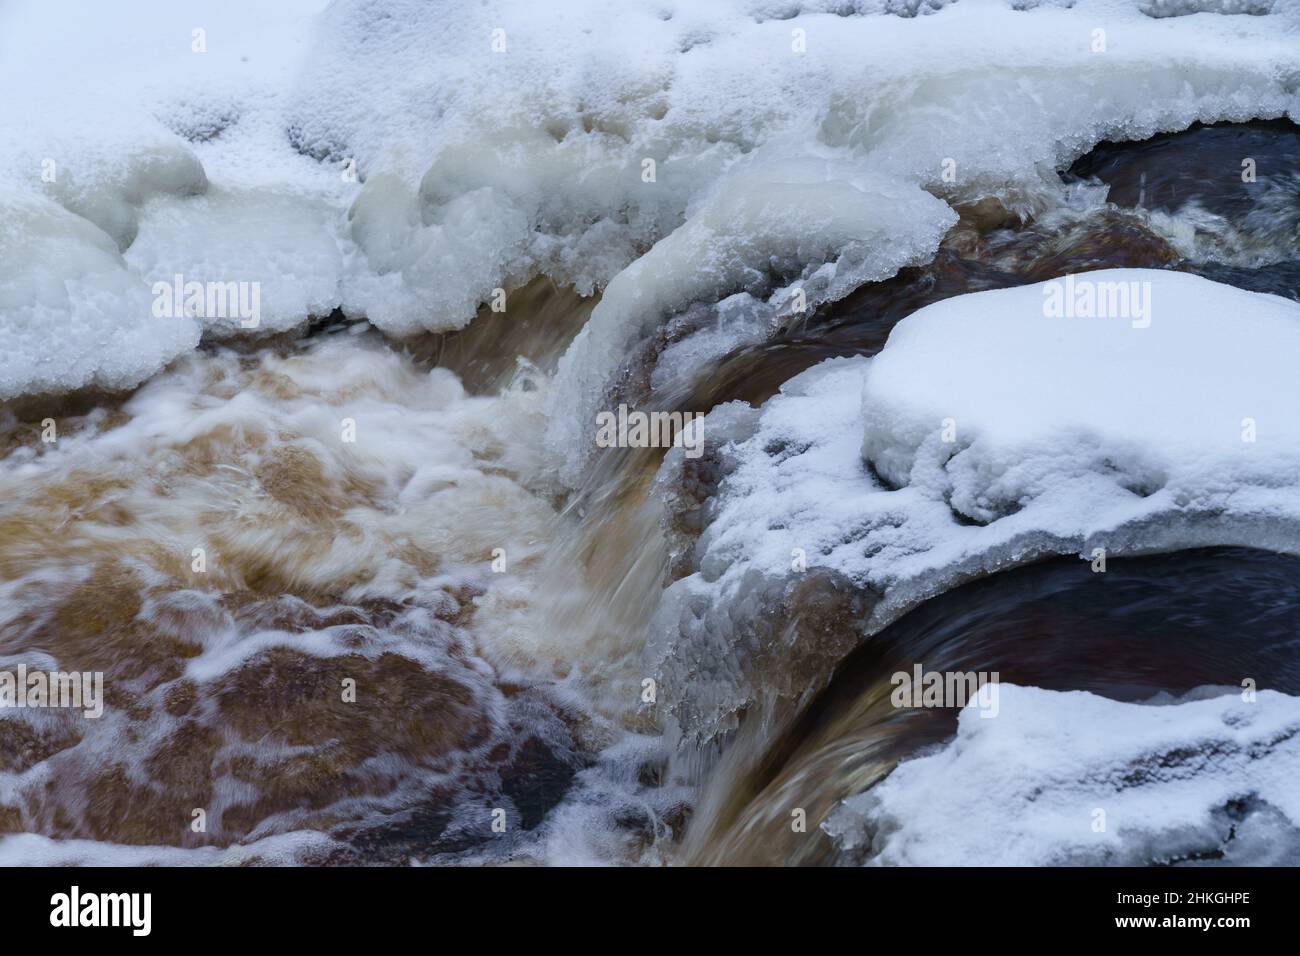 Non-freezing running river in snowy forest on gloomy cold winter day Stock Photo